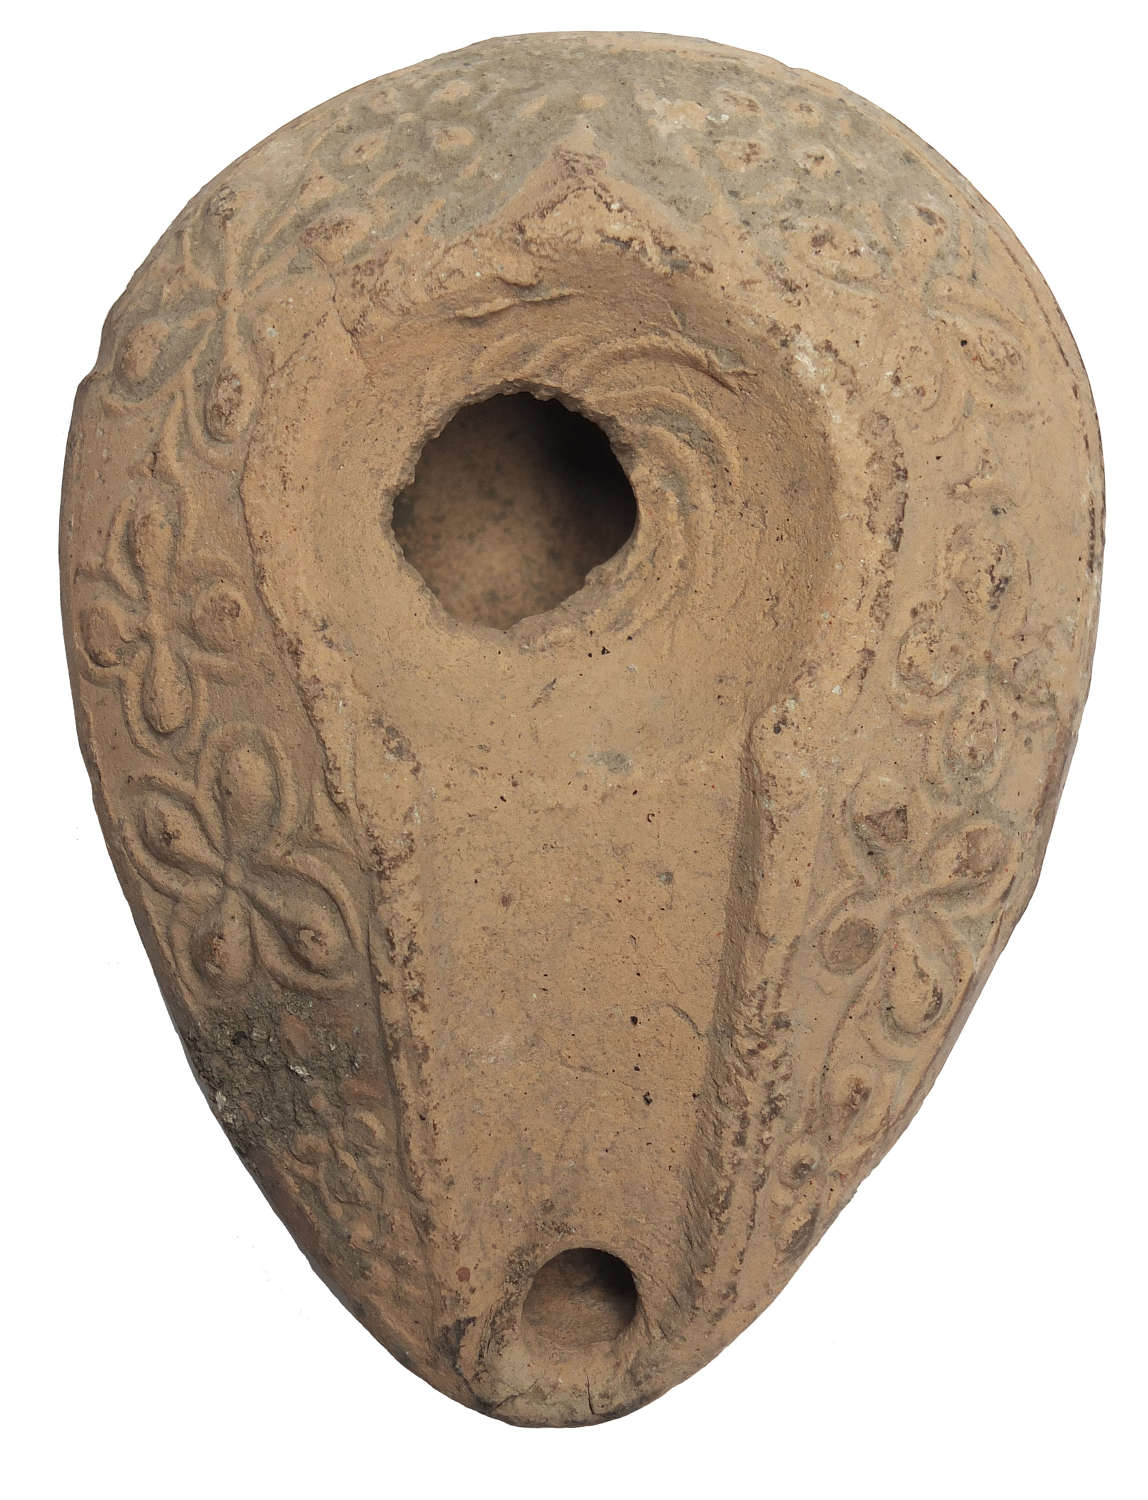 A Byzantine pottery oil lamp, c. 6th - 8th Century A.D.